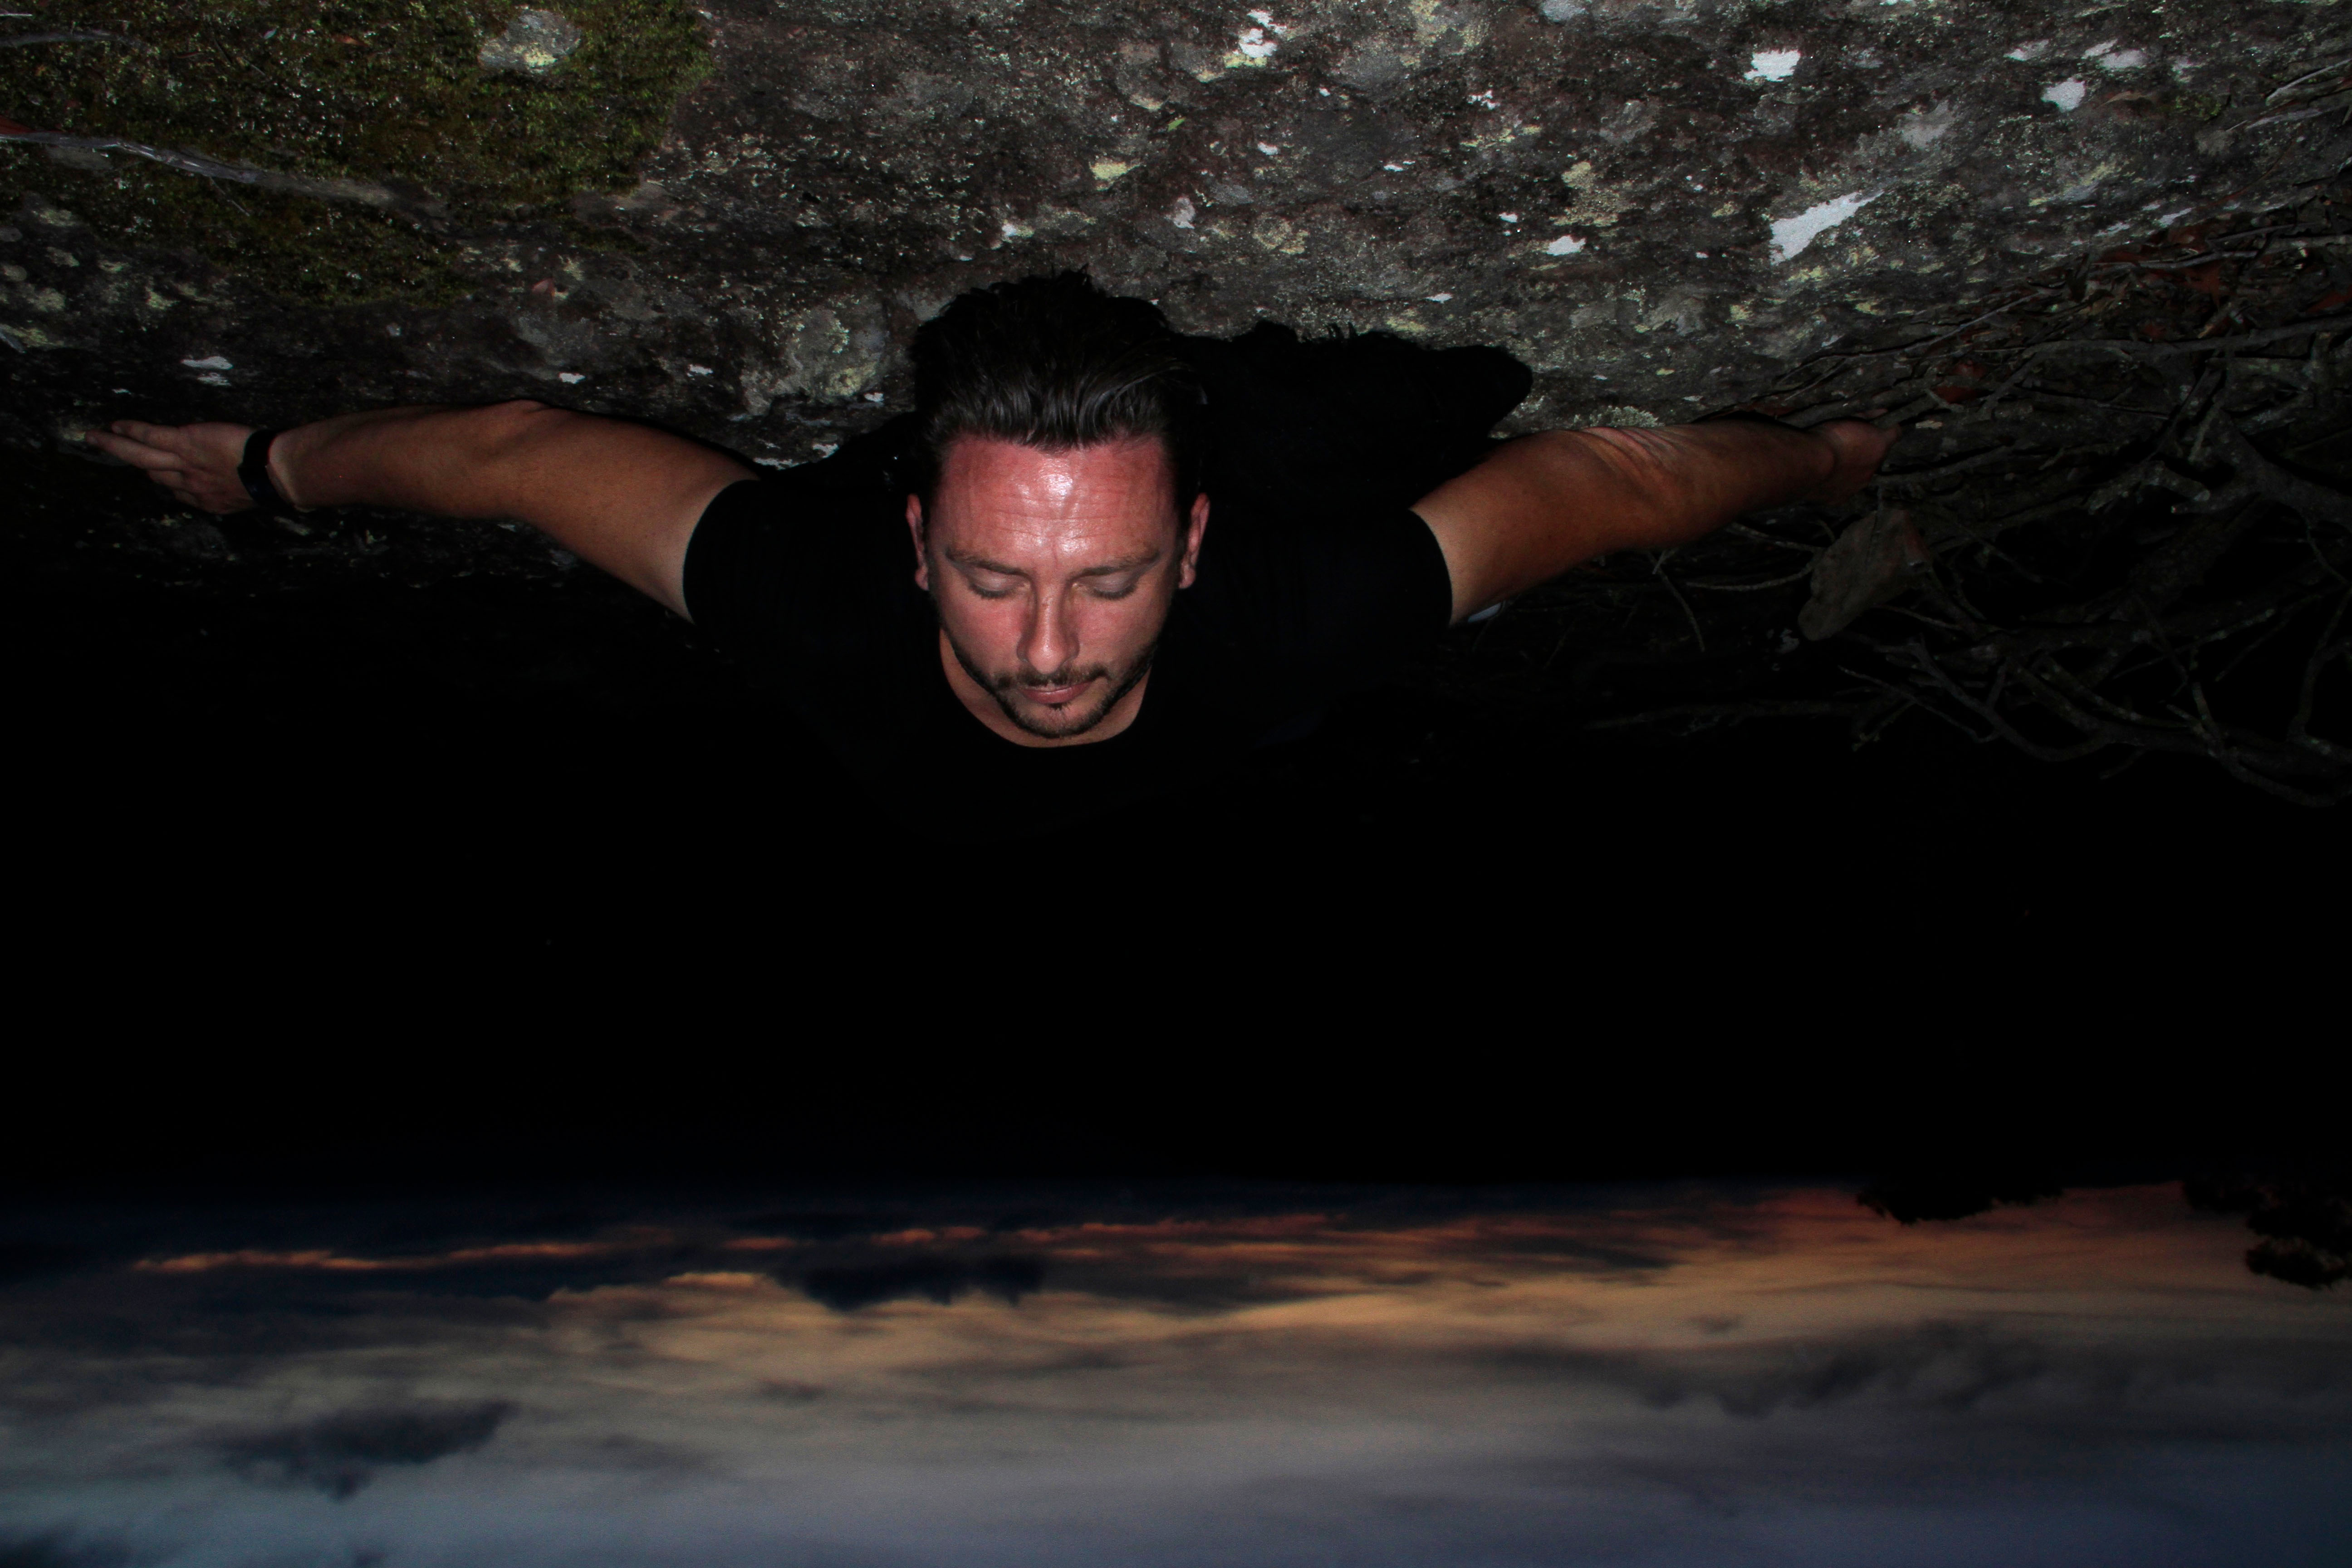 An upside down still of a man laying on the ground outdoors at night.